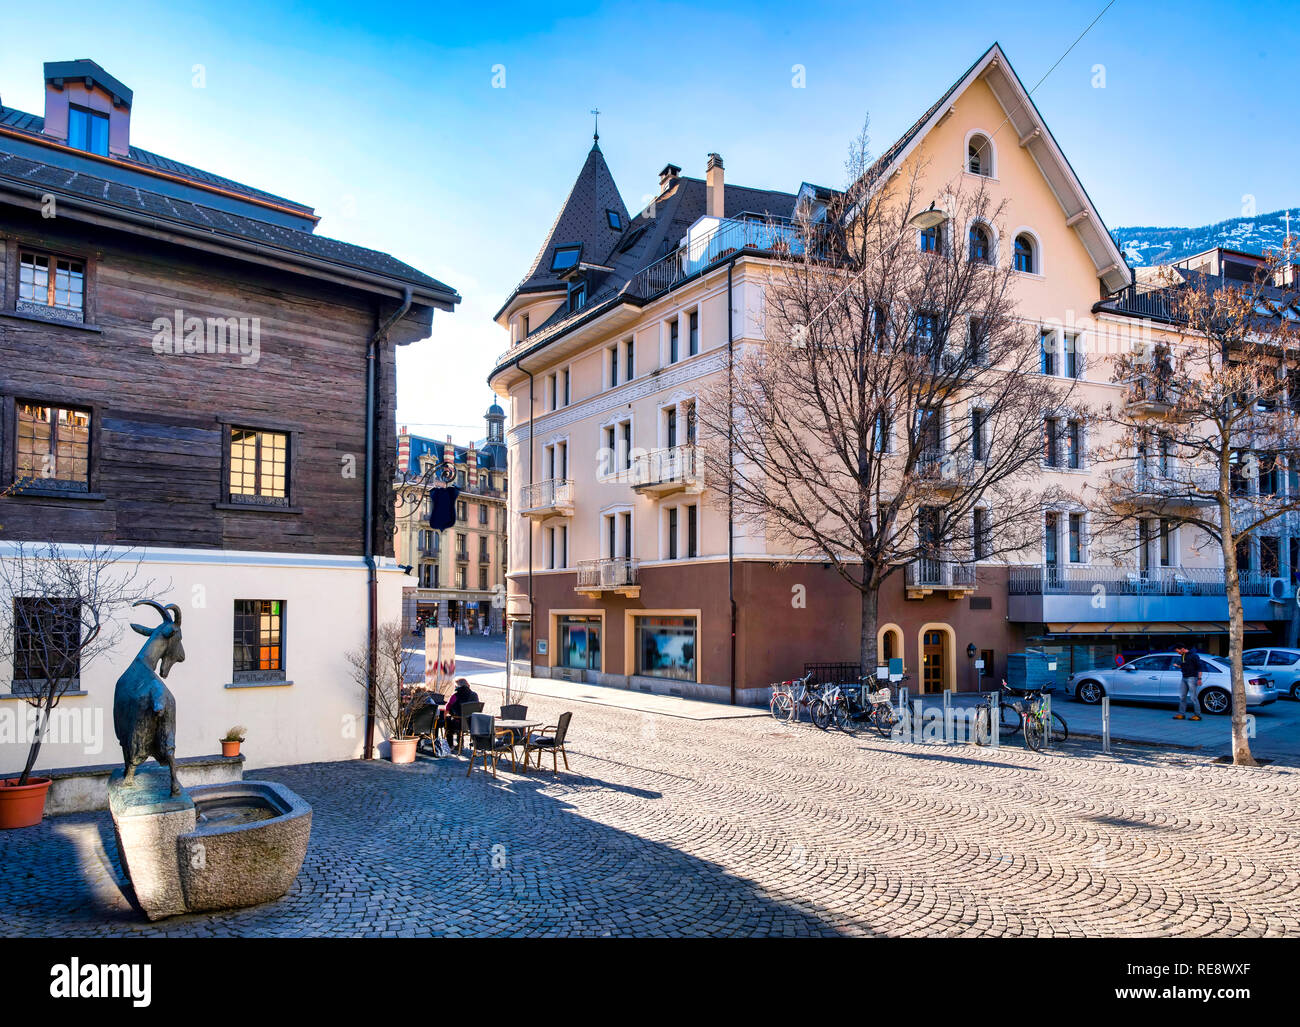 The popular stadtplatz square, located in the downtown area of the city. Stock Photo